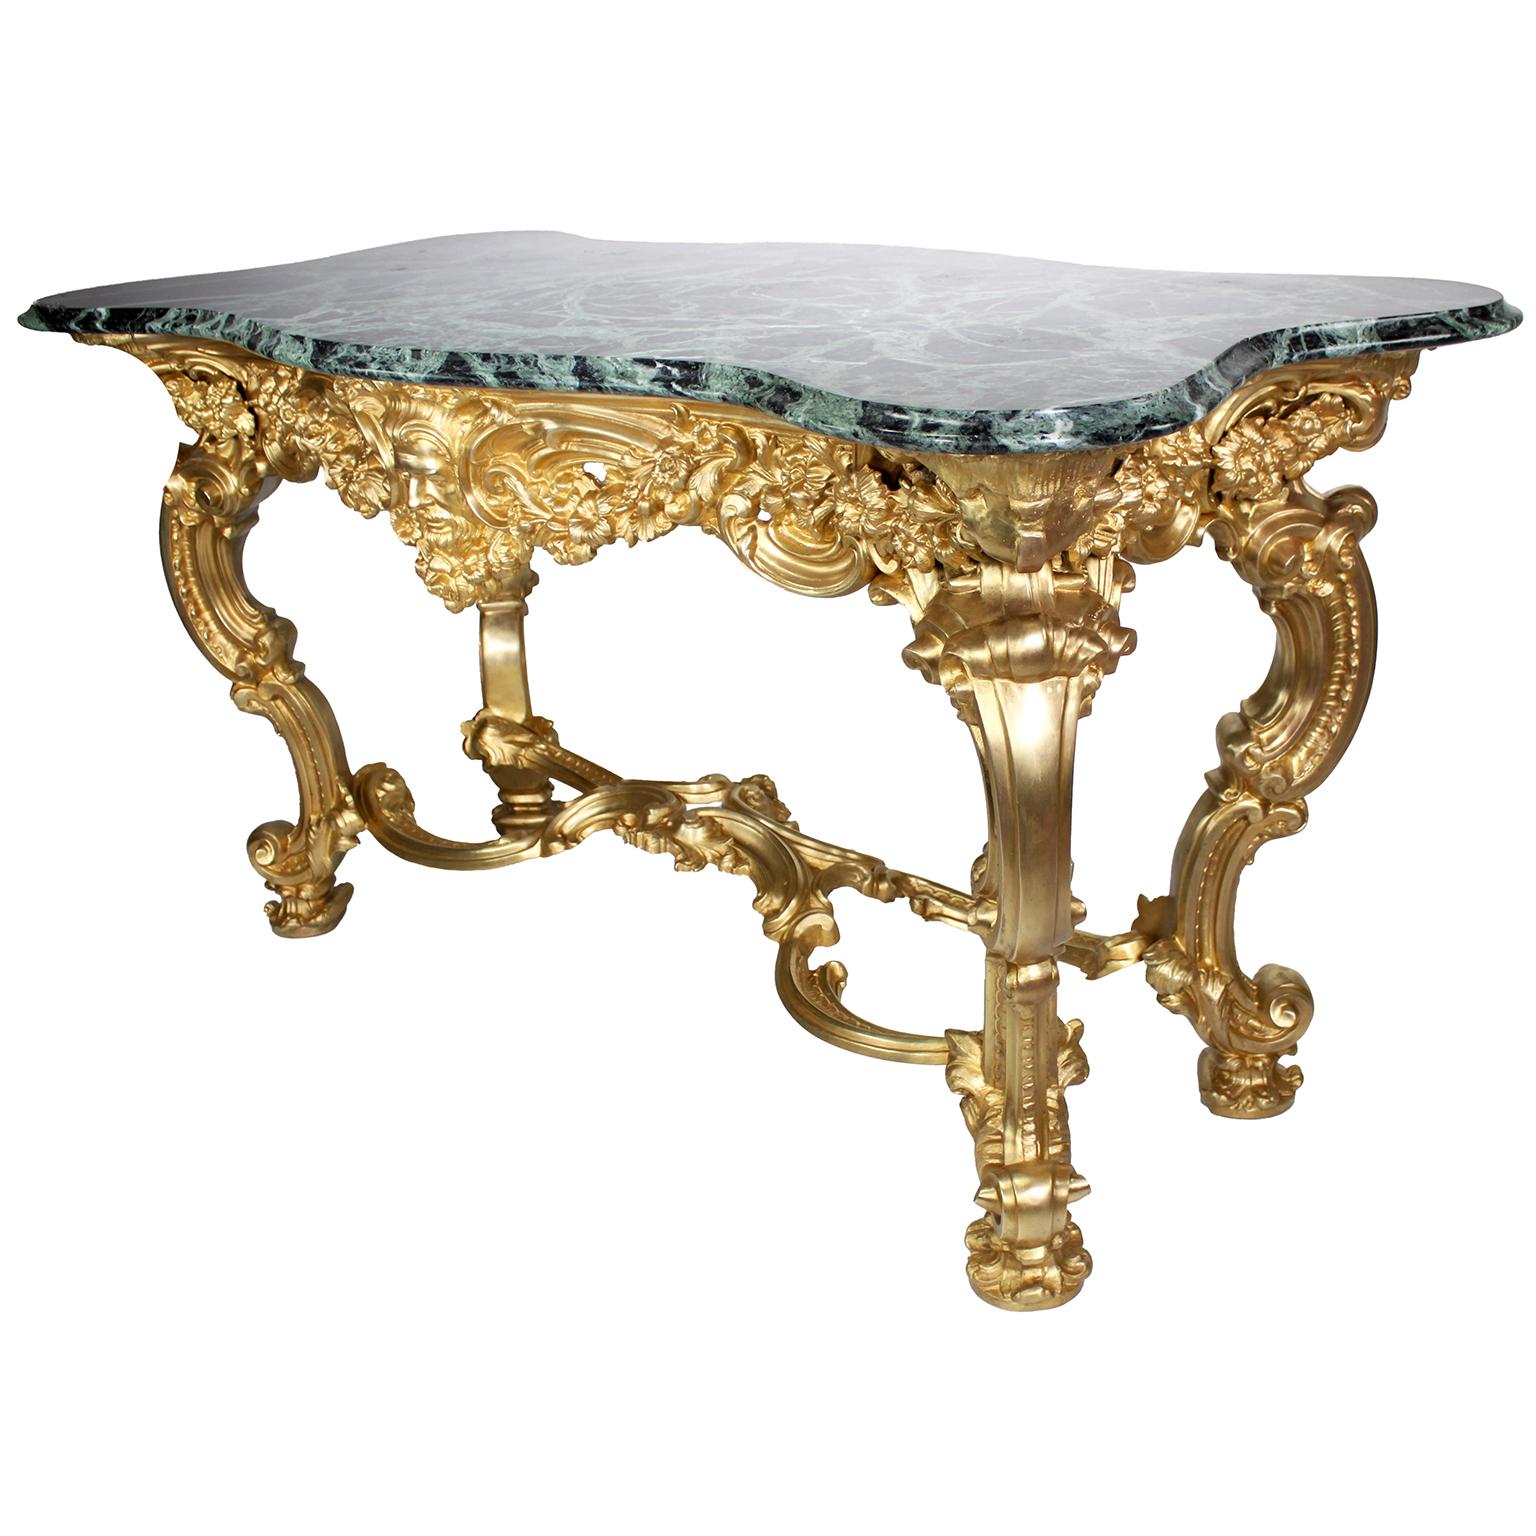 Rococo Revival Pair Italian Early 20th Century Rococo-Style Gilt-Bronze Center Tables/Consoles  For Sale